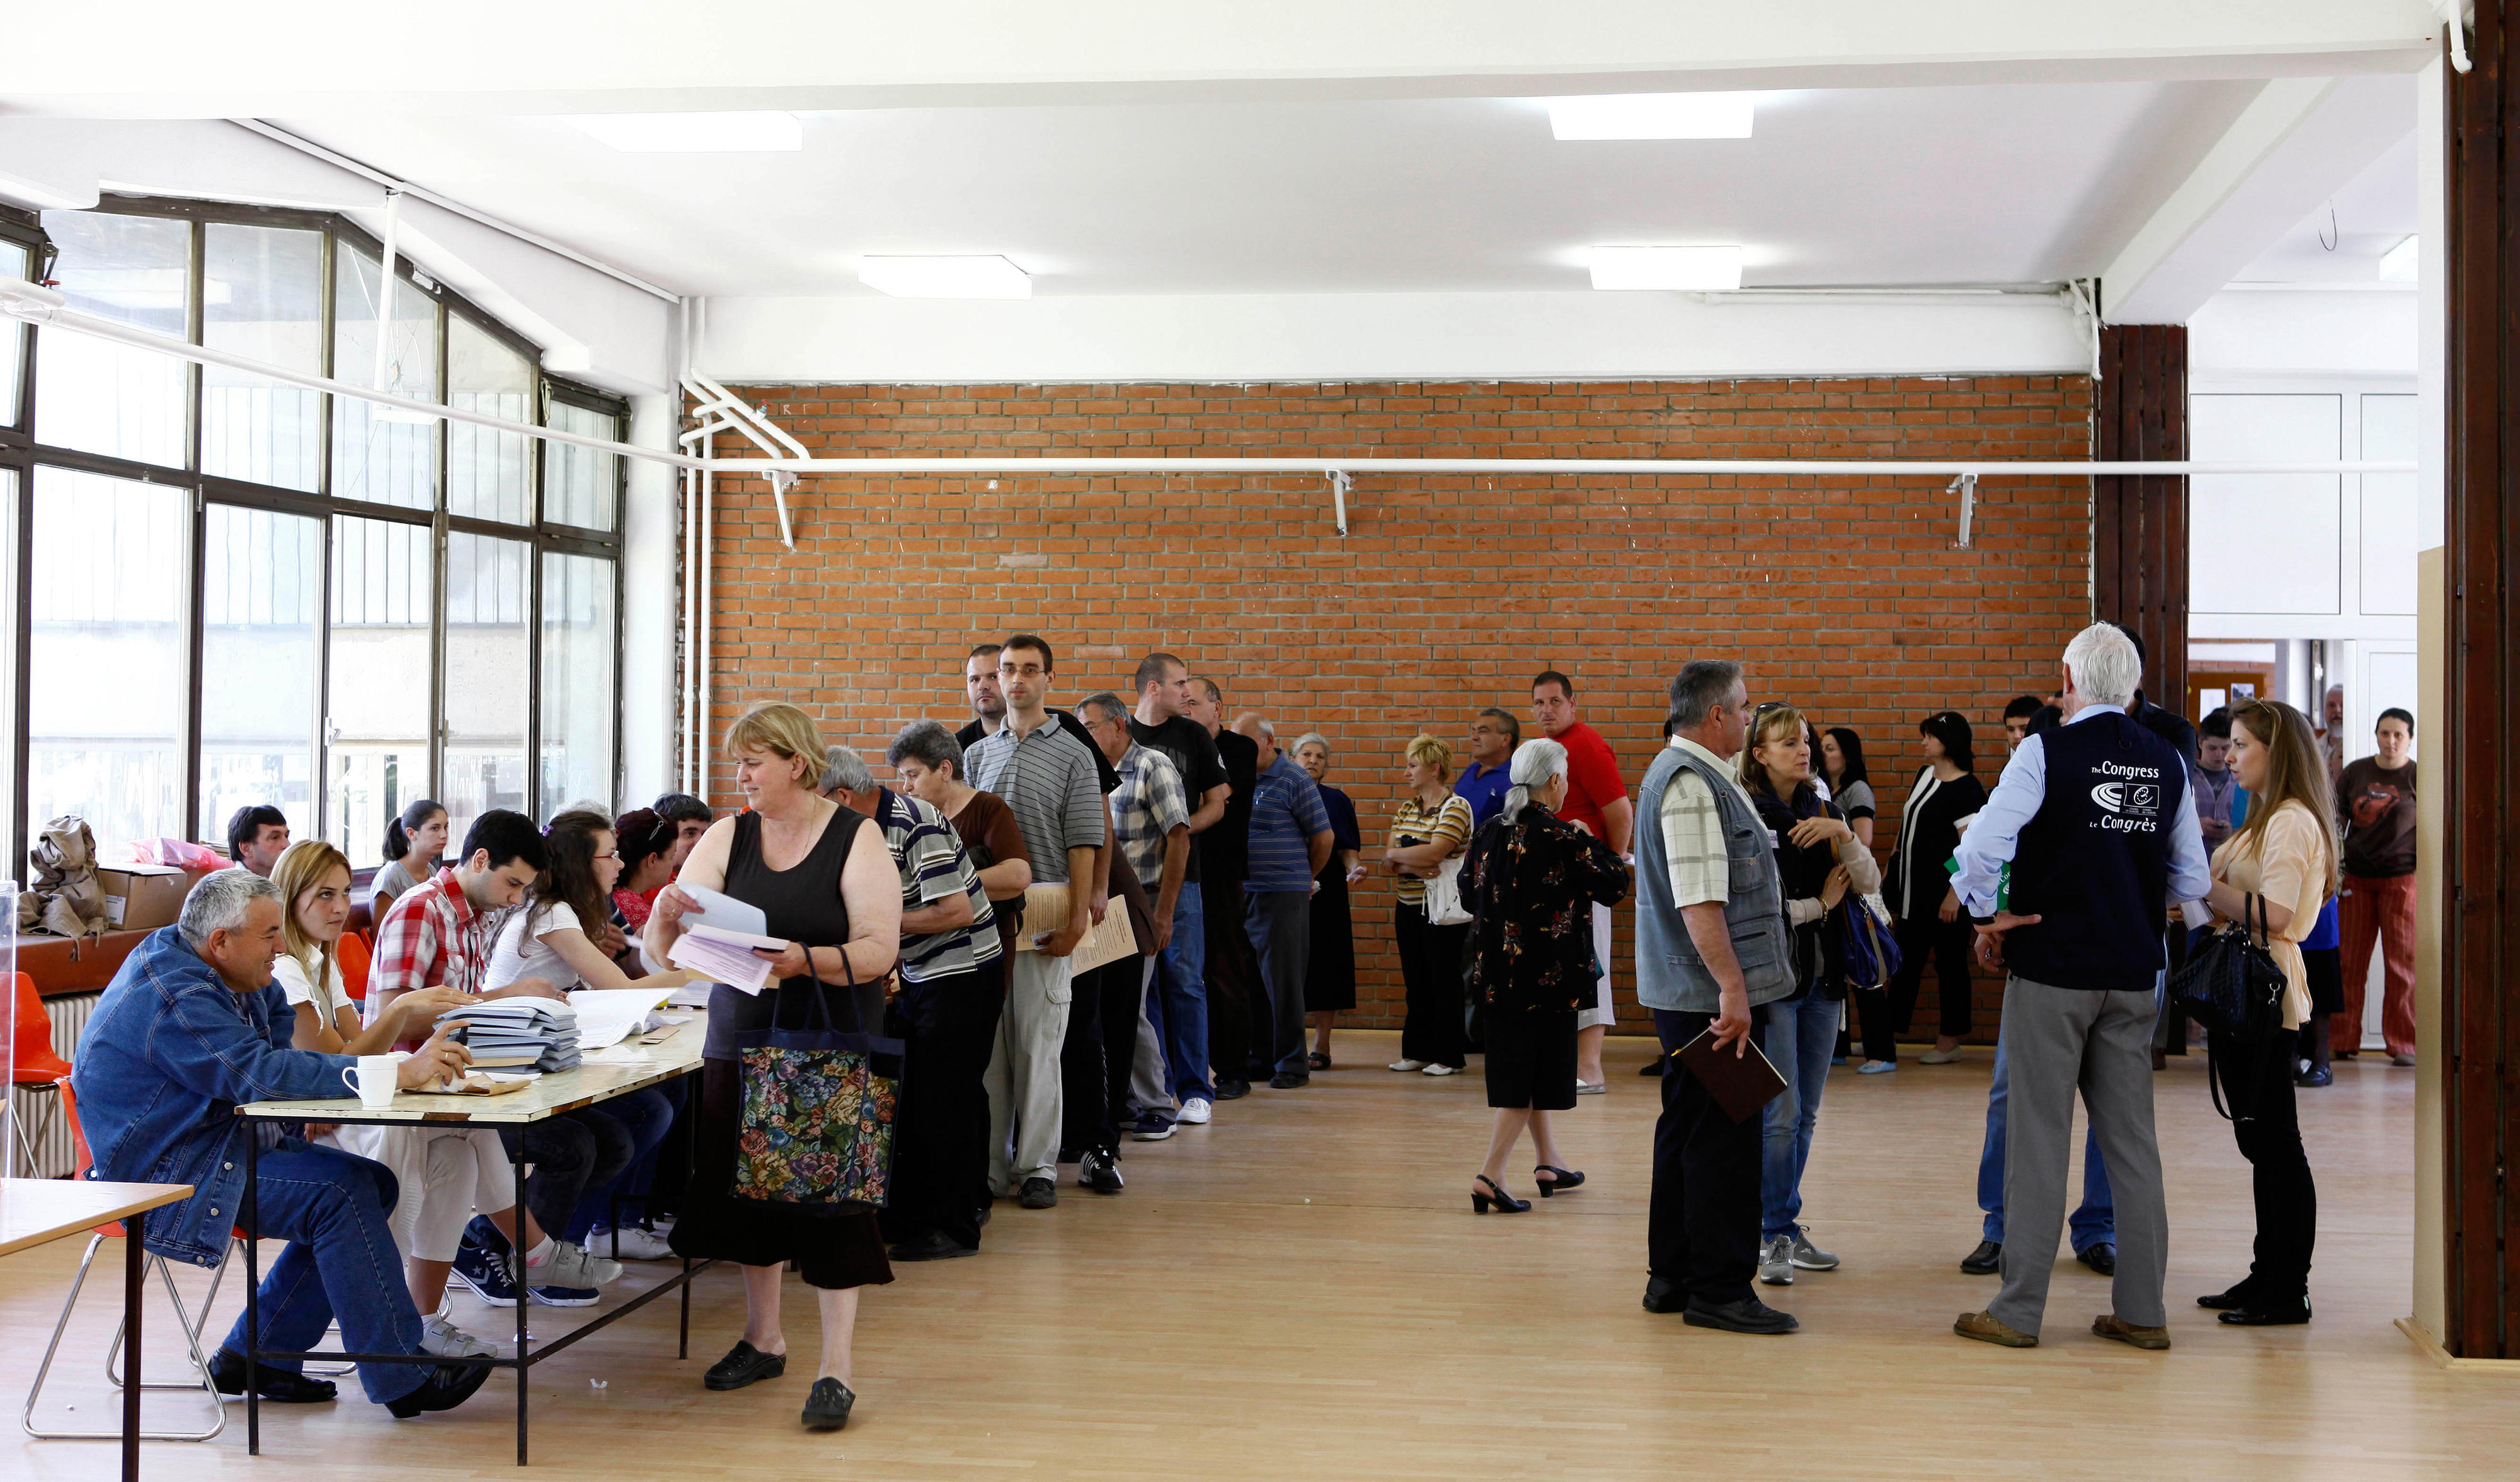 A polling station at the regional elections in Serbia